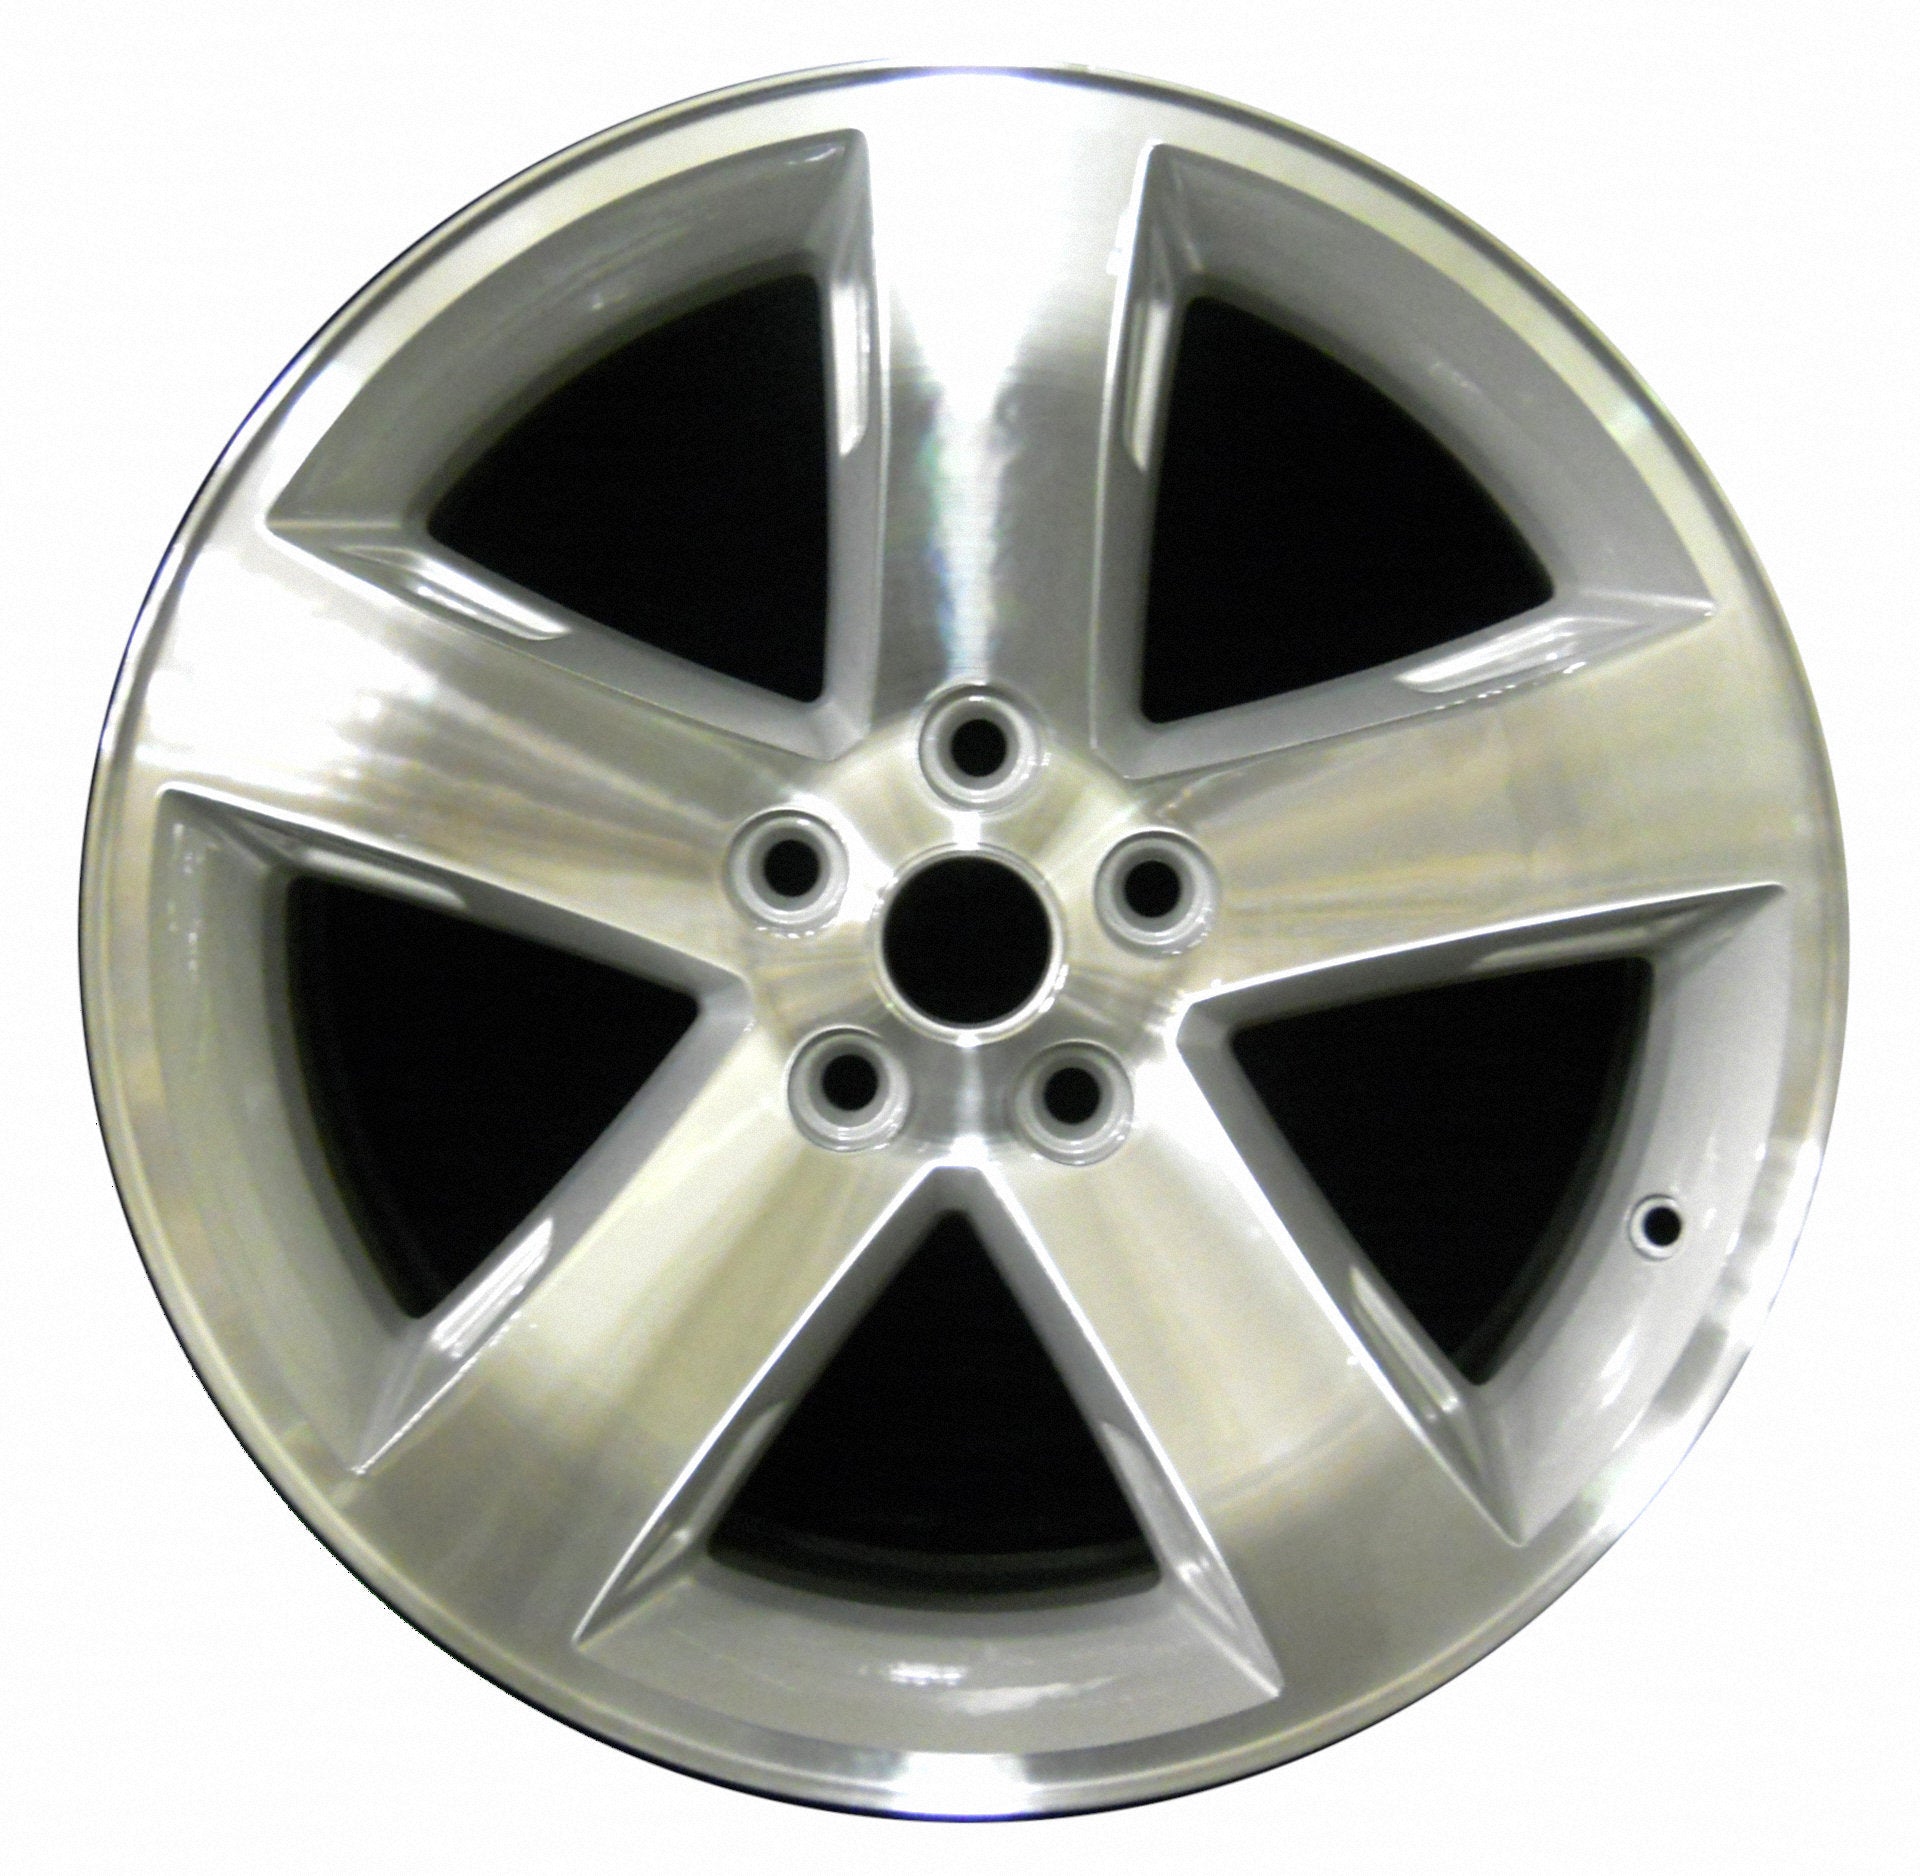 Dodge Challenger  2009, 2010, 2011, 2012, 2013, 2014 Factory OEM Car Wheel Size 18x7.5 Alloy WAO.2359A.PS09.MA